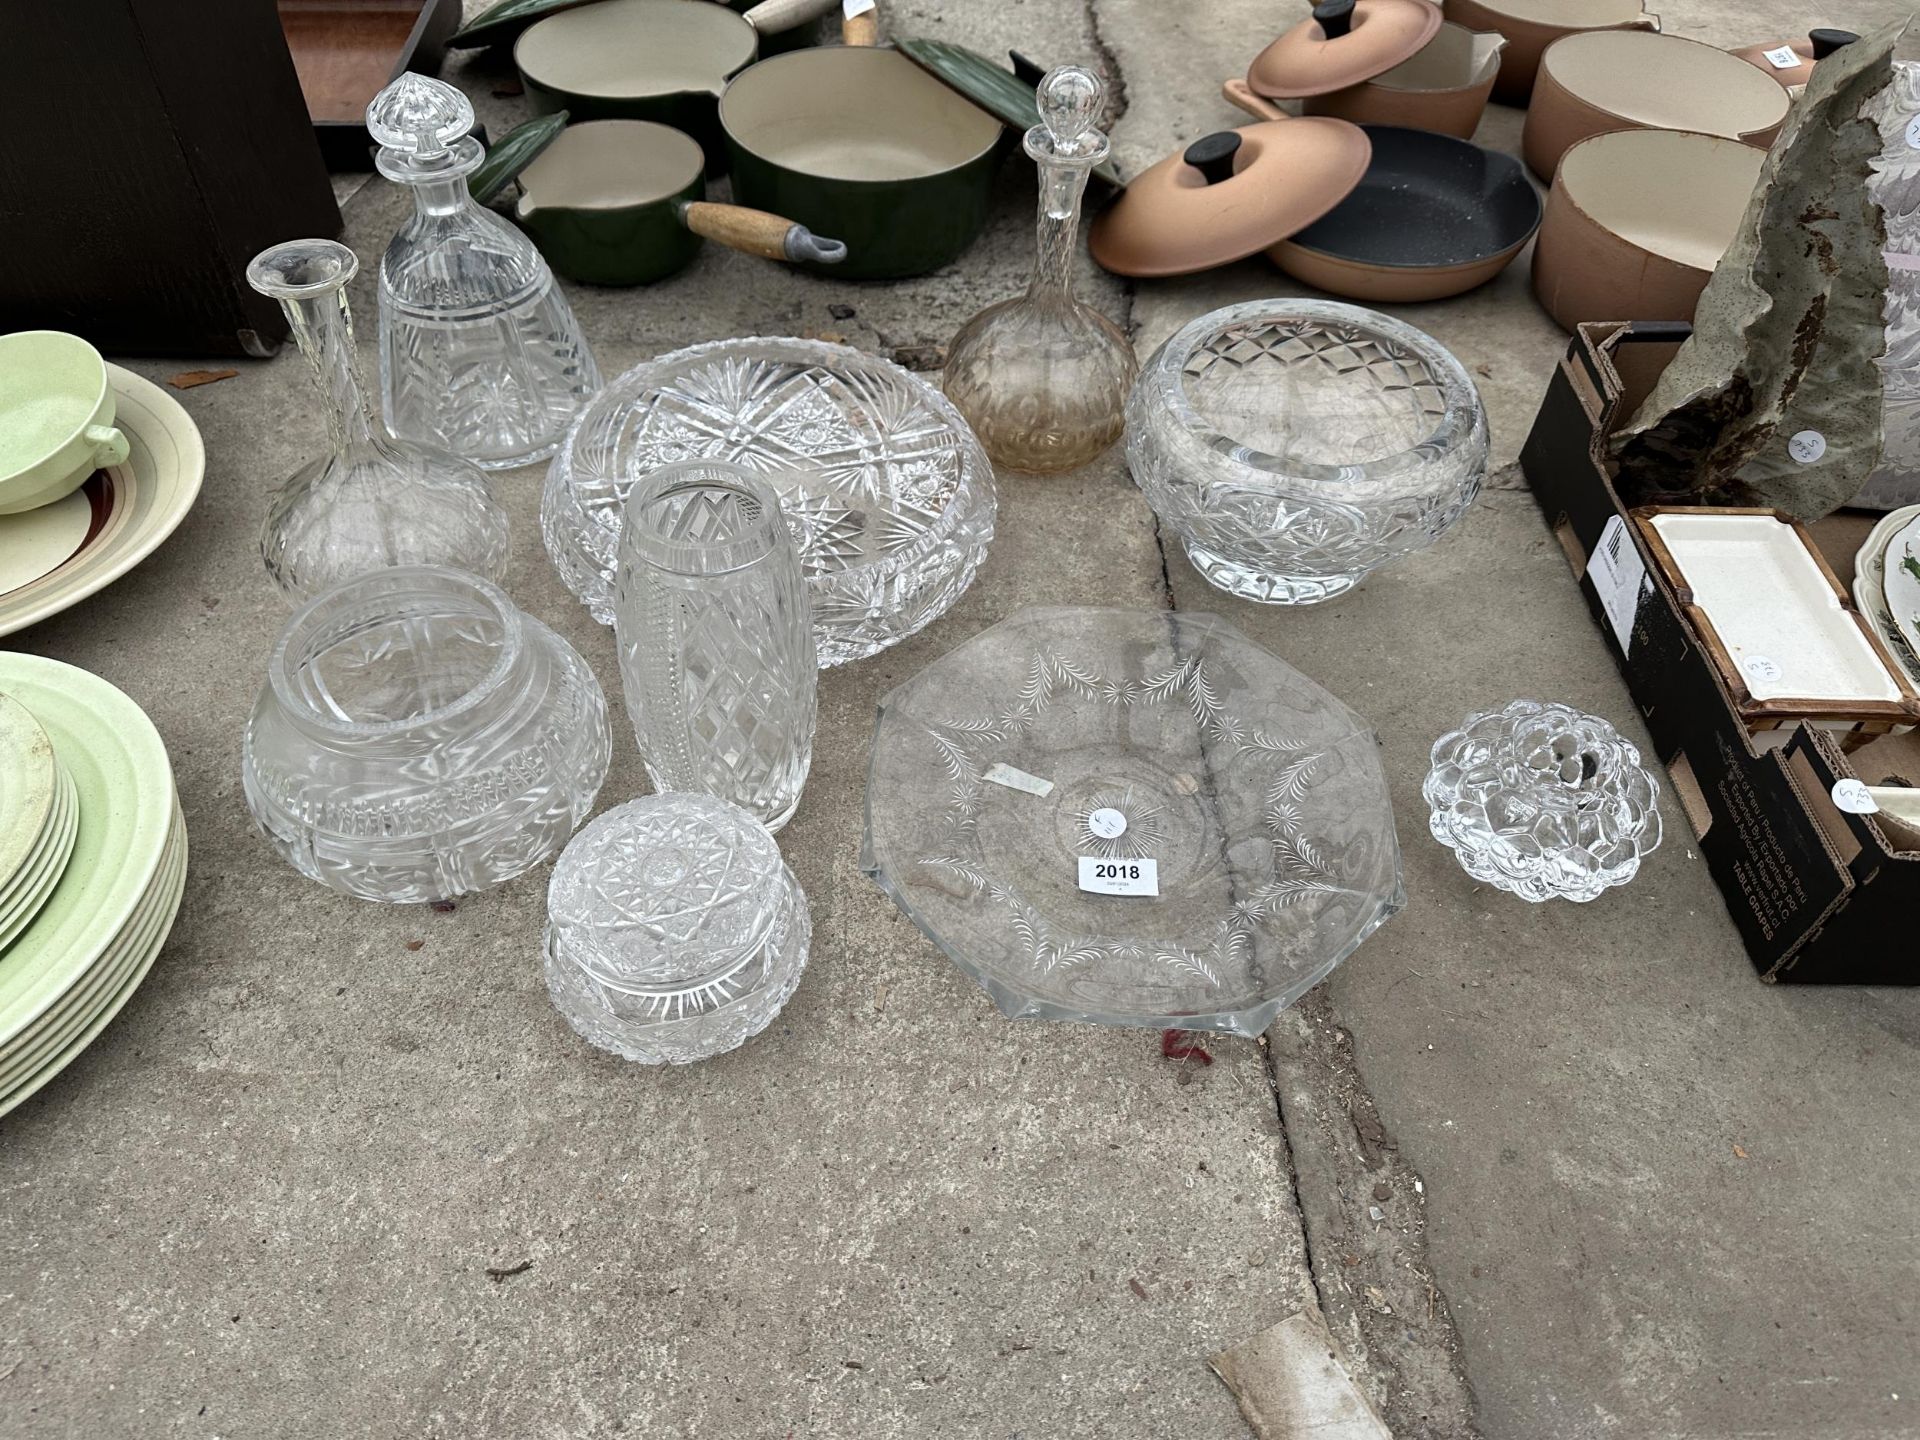 AN ASSORTMENT OF GLASS WARE TO INCLUDE DECANTORS AND BOWLS ETC